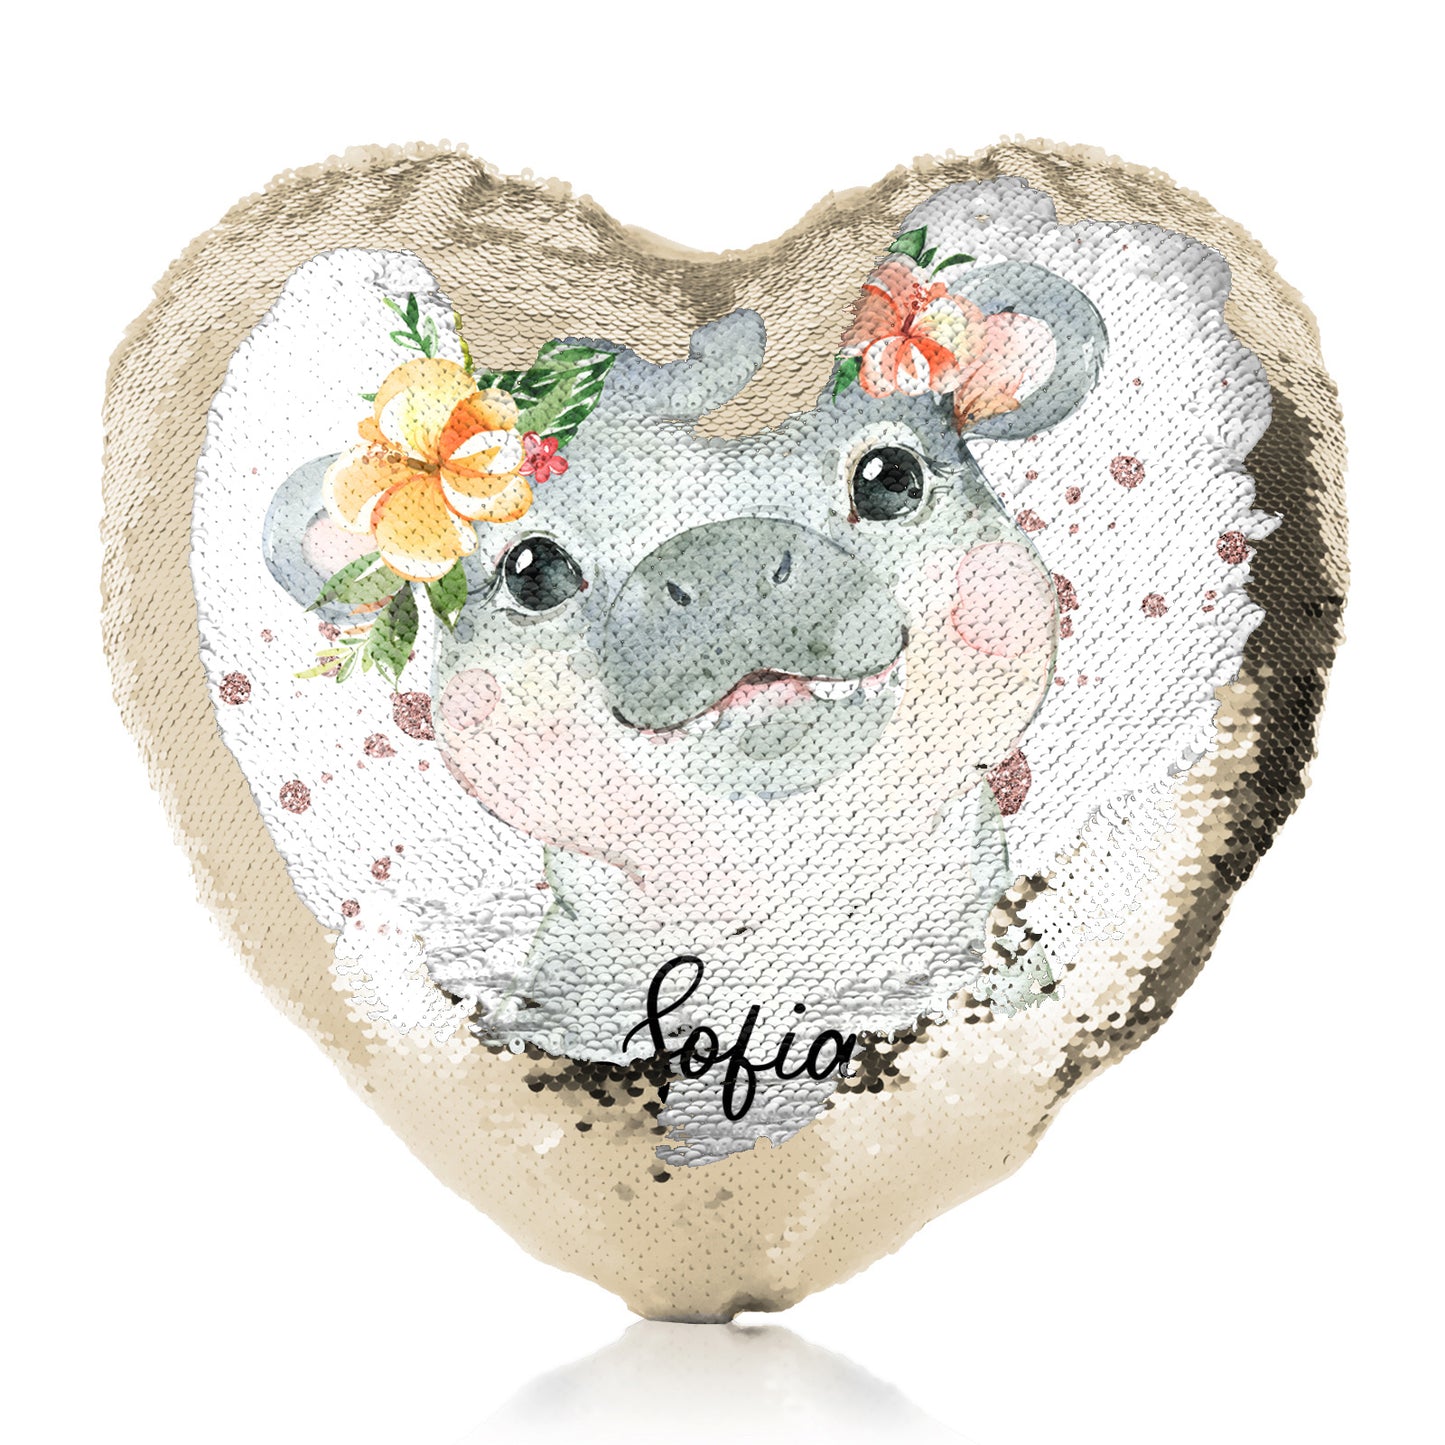 Personalised Sequin Heart Cushion with Hippo Rain Drop Glitter Print and Cute Text